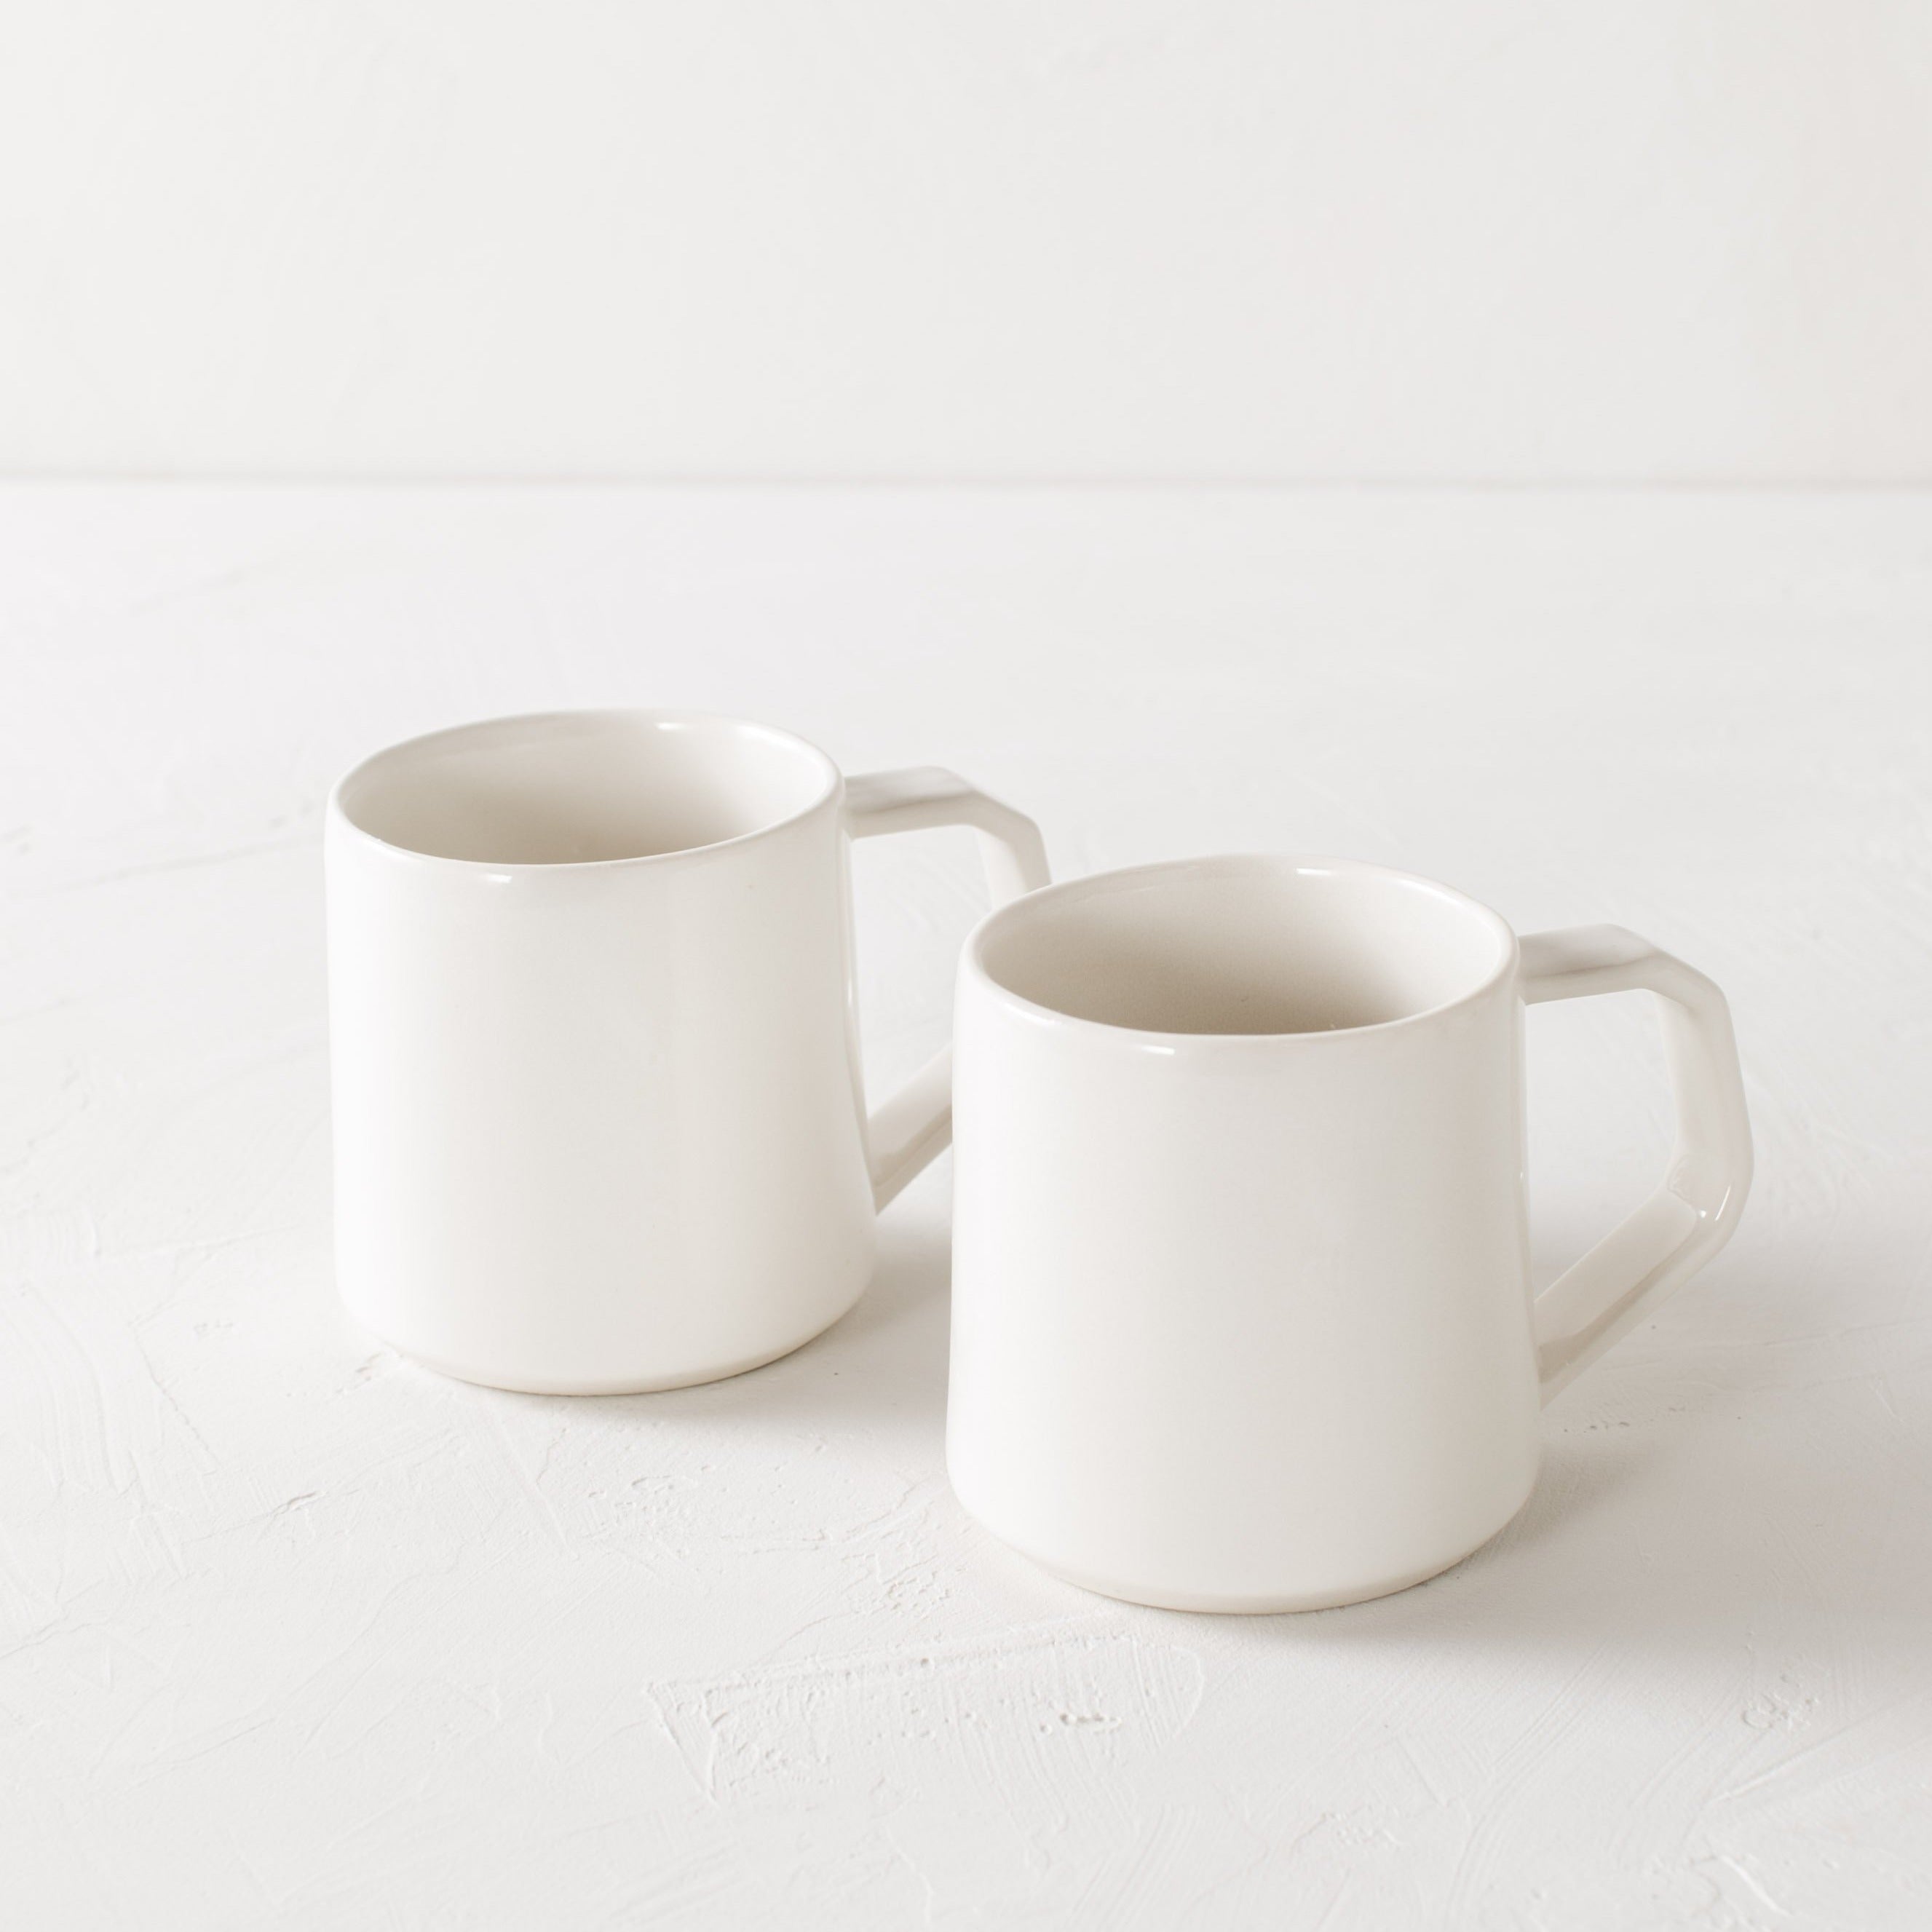 Pair of white minimal ceramic mug is staged on a white textured table top and white textured back drop. Mugs are glazes in ivory white and the handles are geometric in shape but still rounded. Convivial Production, Kansas City Ceramics. Handmade ceramic mug.  